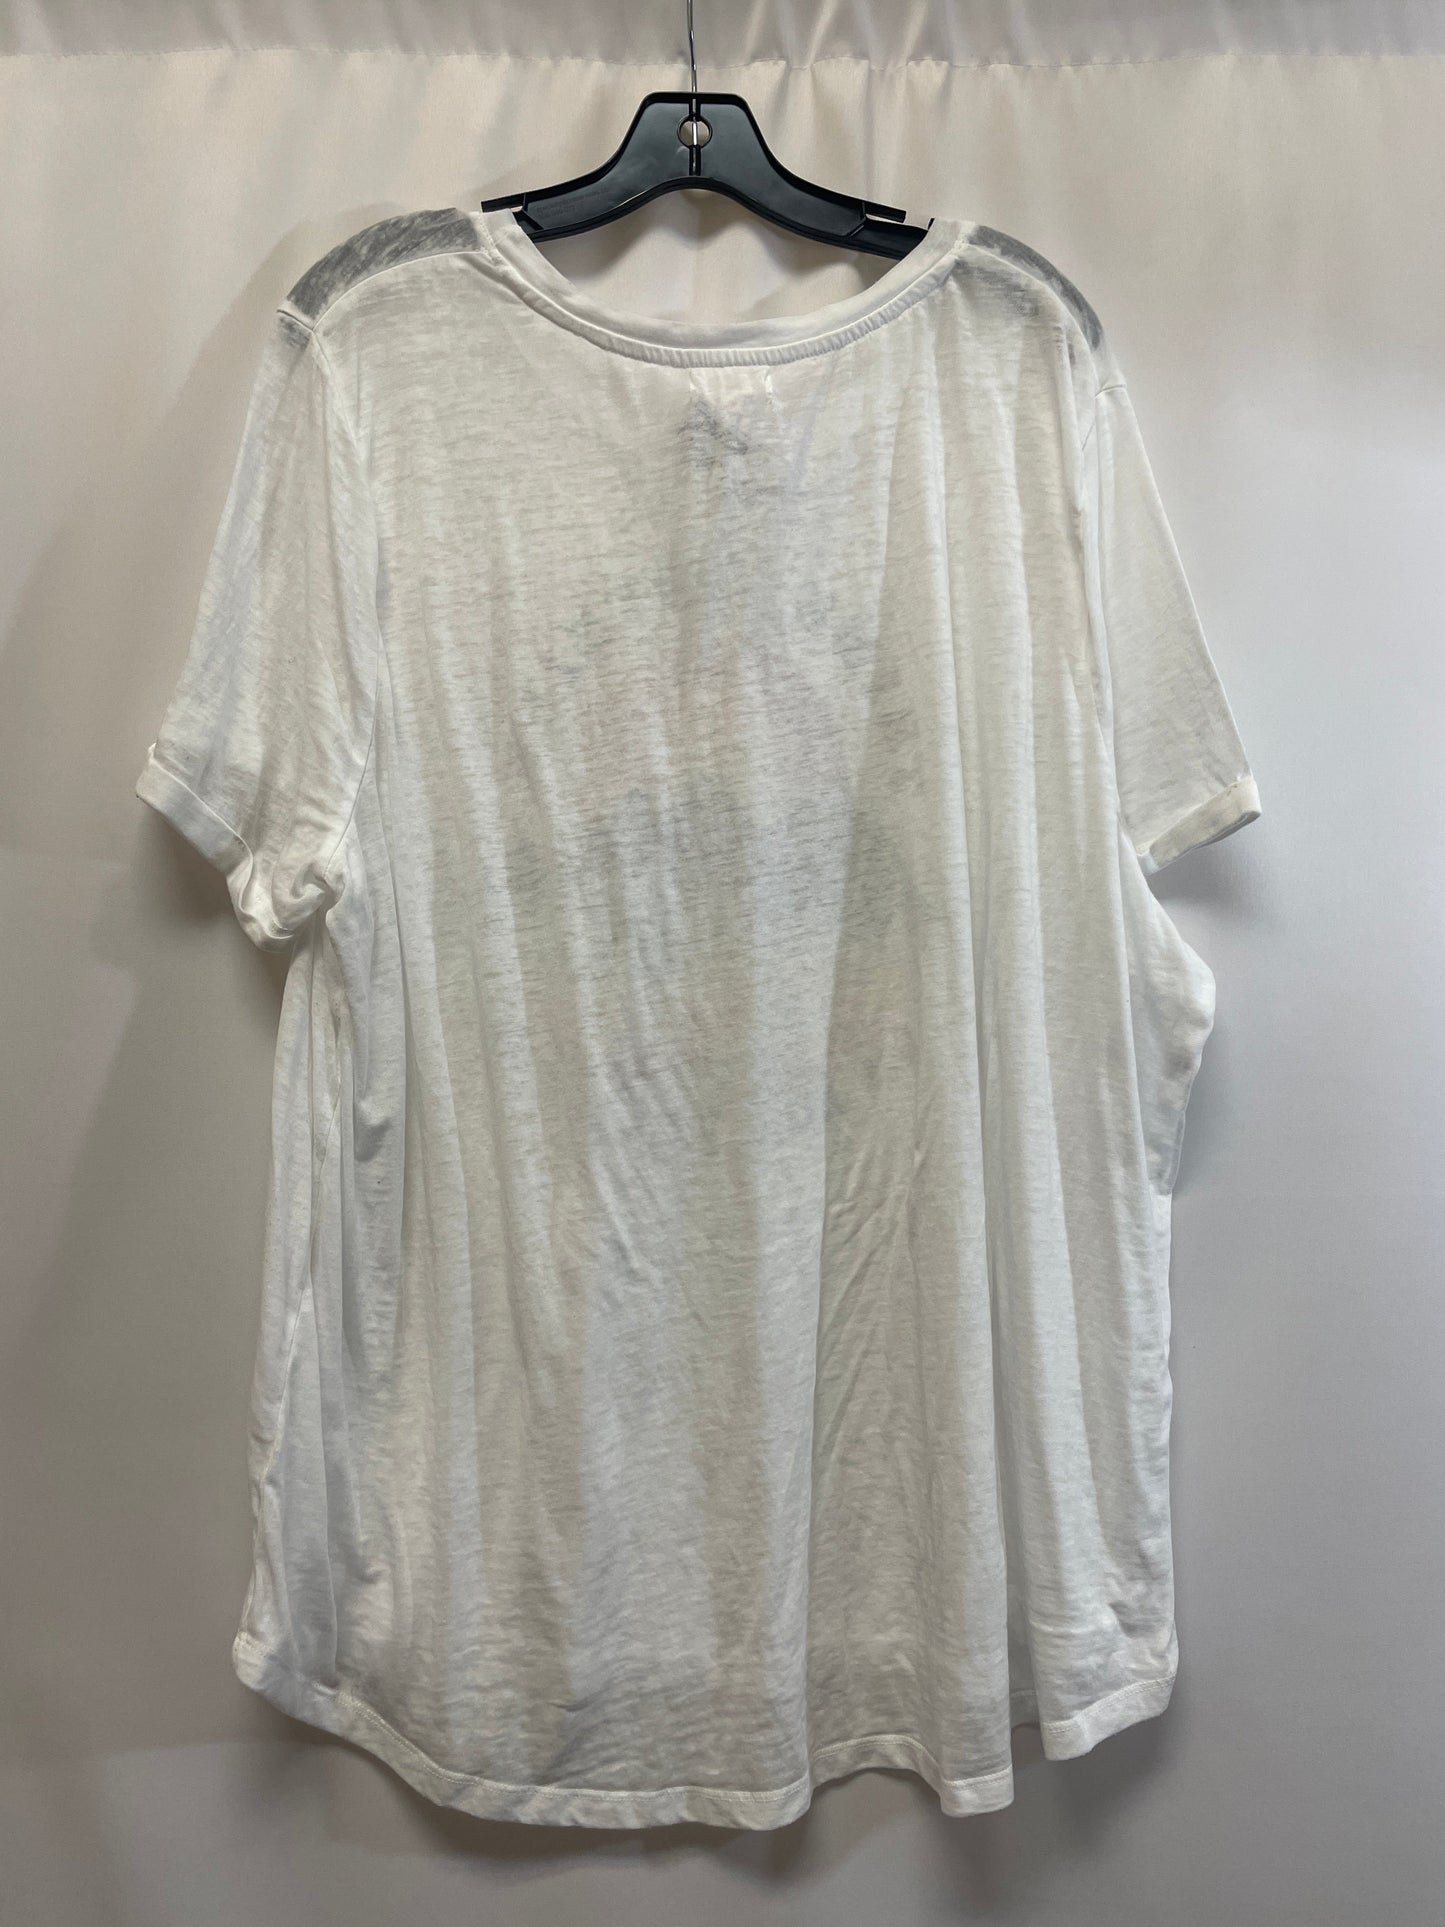 White Top Short Sleeve Maurices, Size 3x